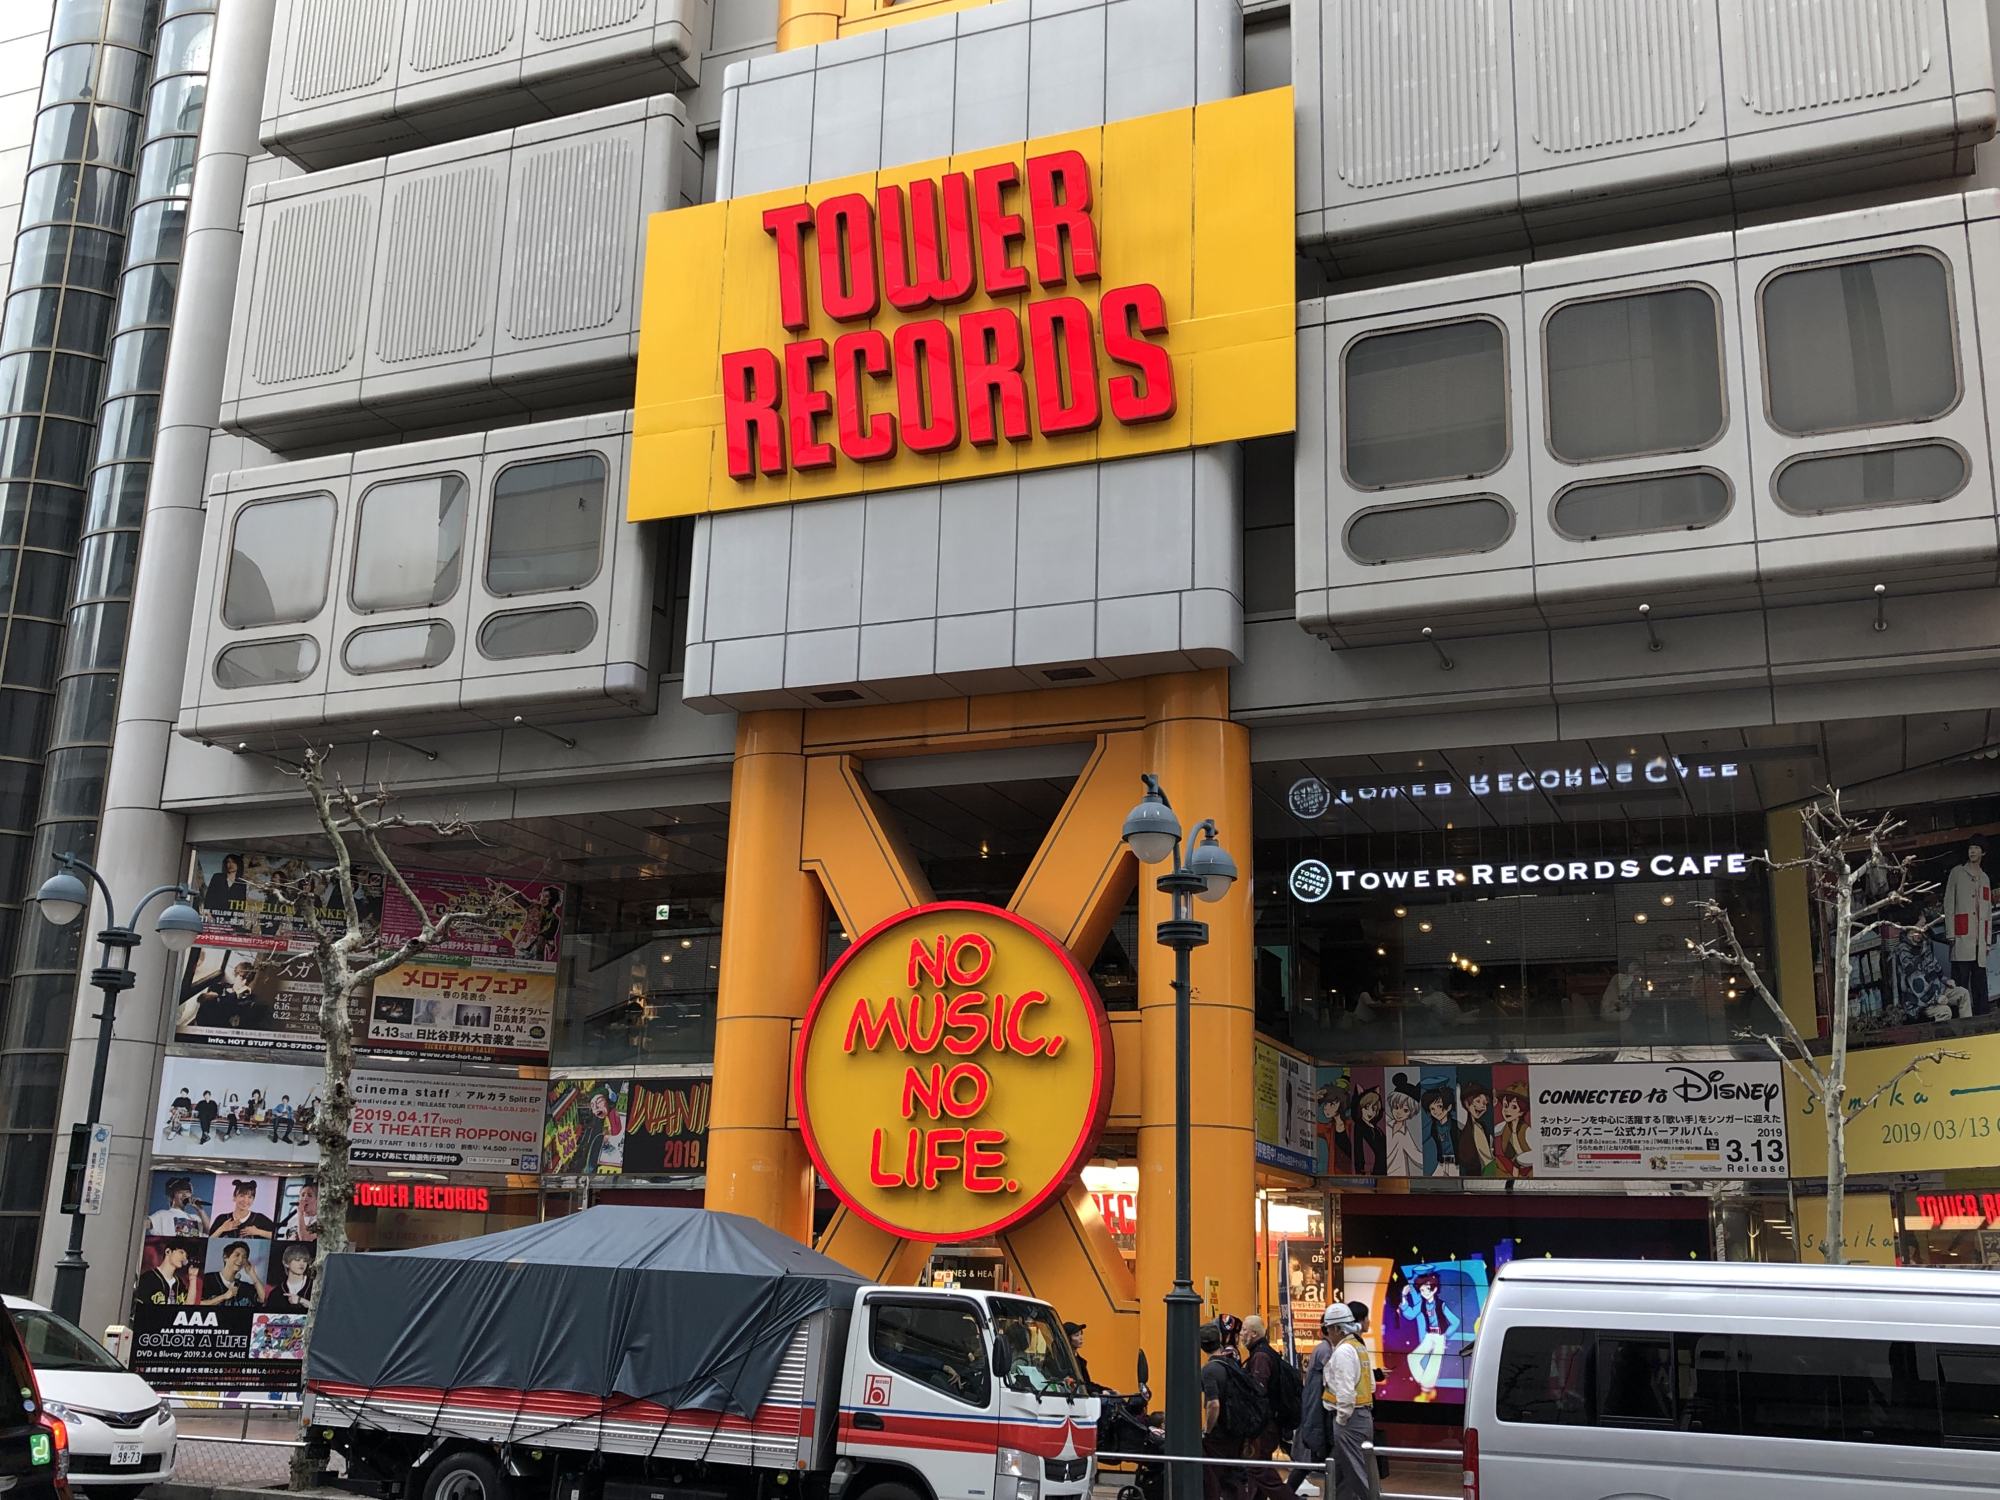 Tower records is one of the most popular shops to buy physical albums in Japan. CDs and vinyl records can be found here.